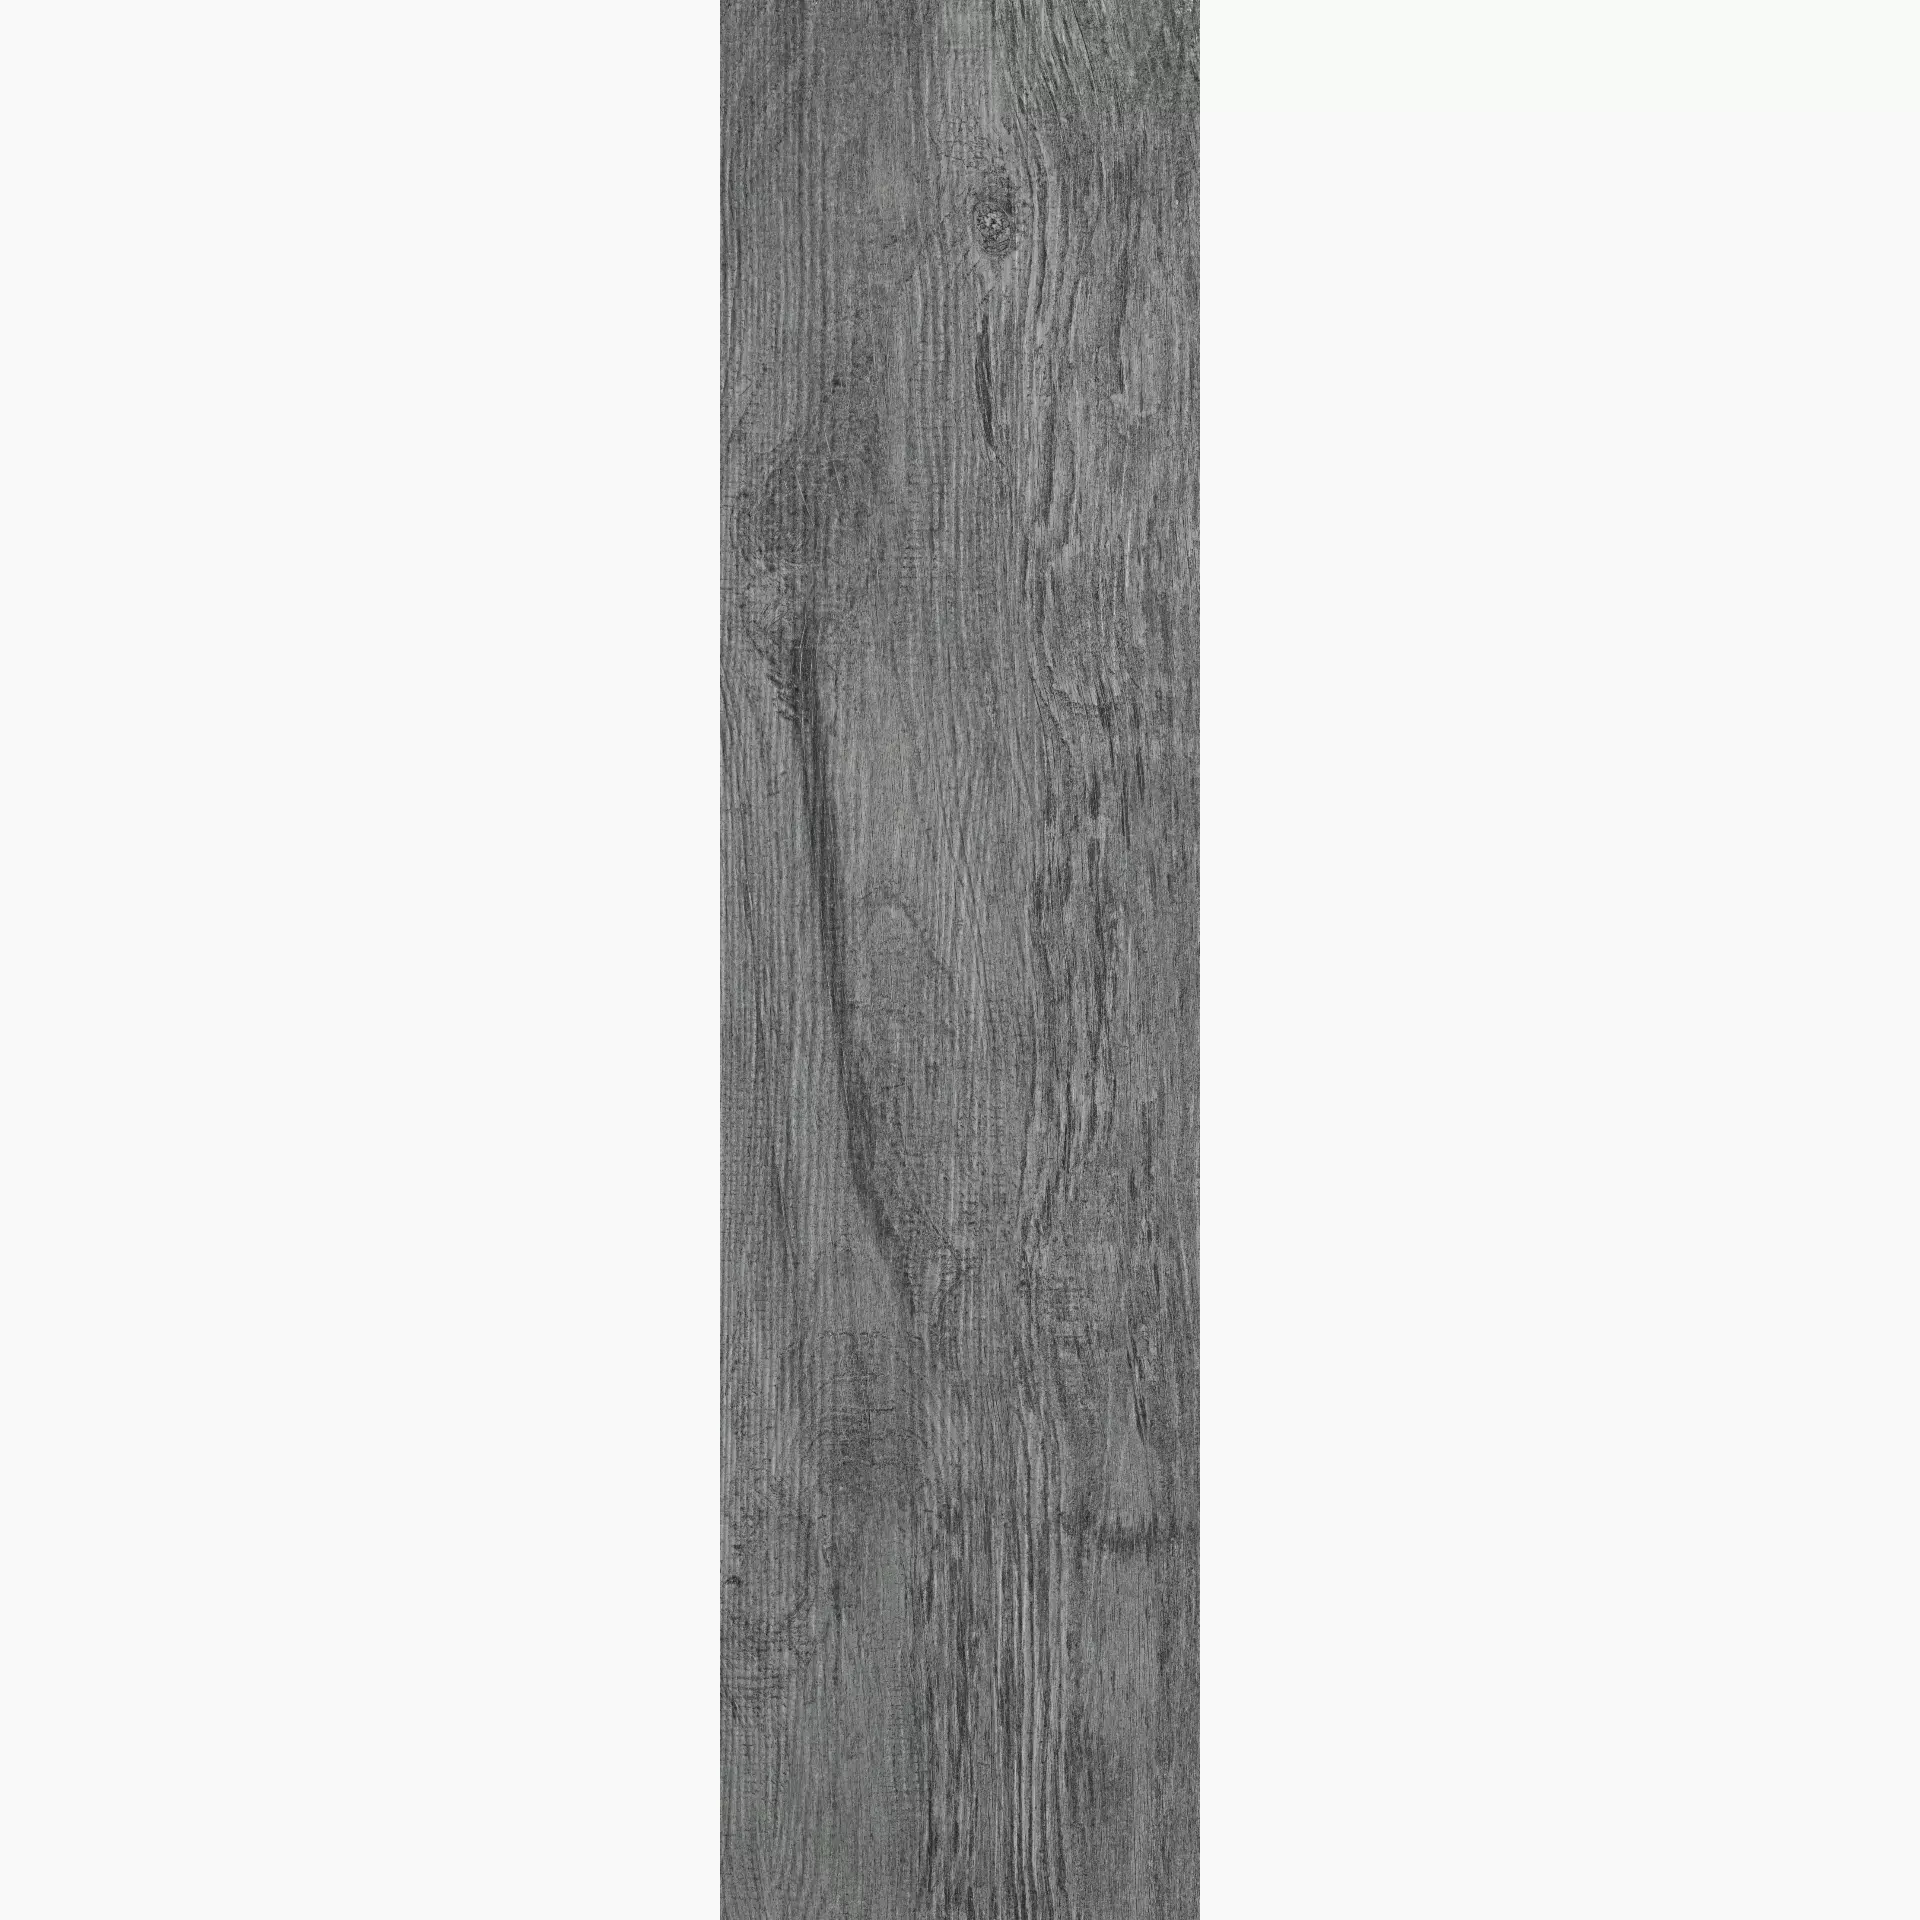 Serenissima Norway Long Night Naturale 1050646 30x120cm rectified 10mm